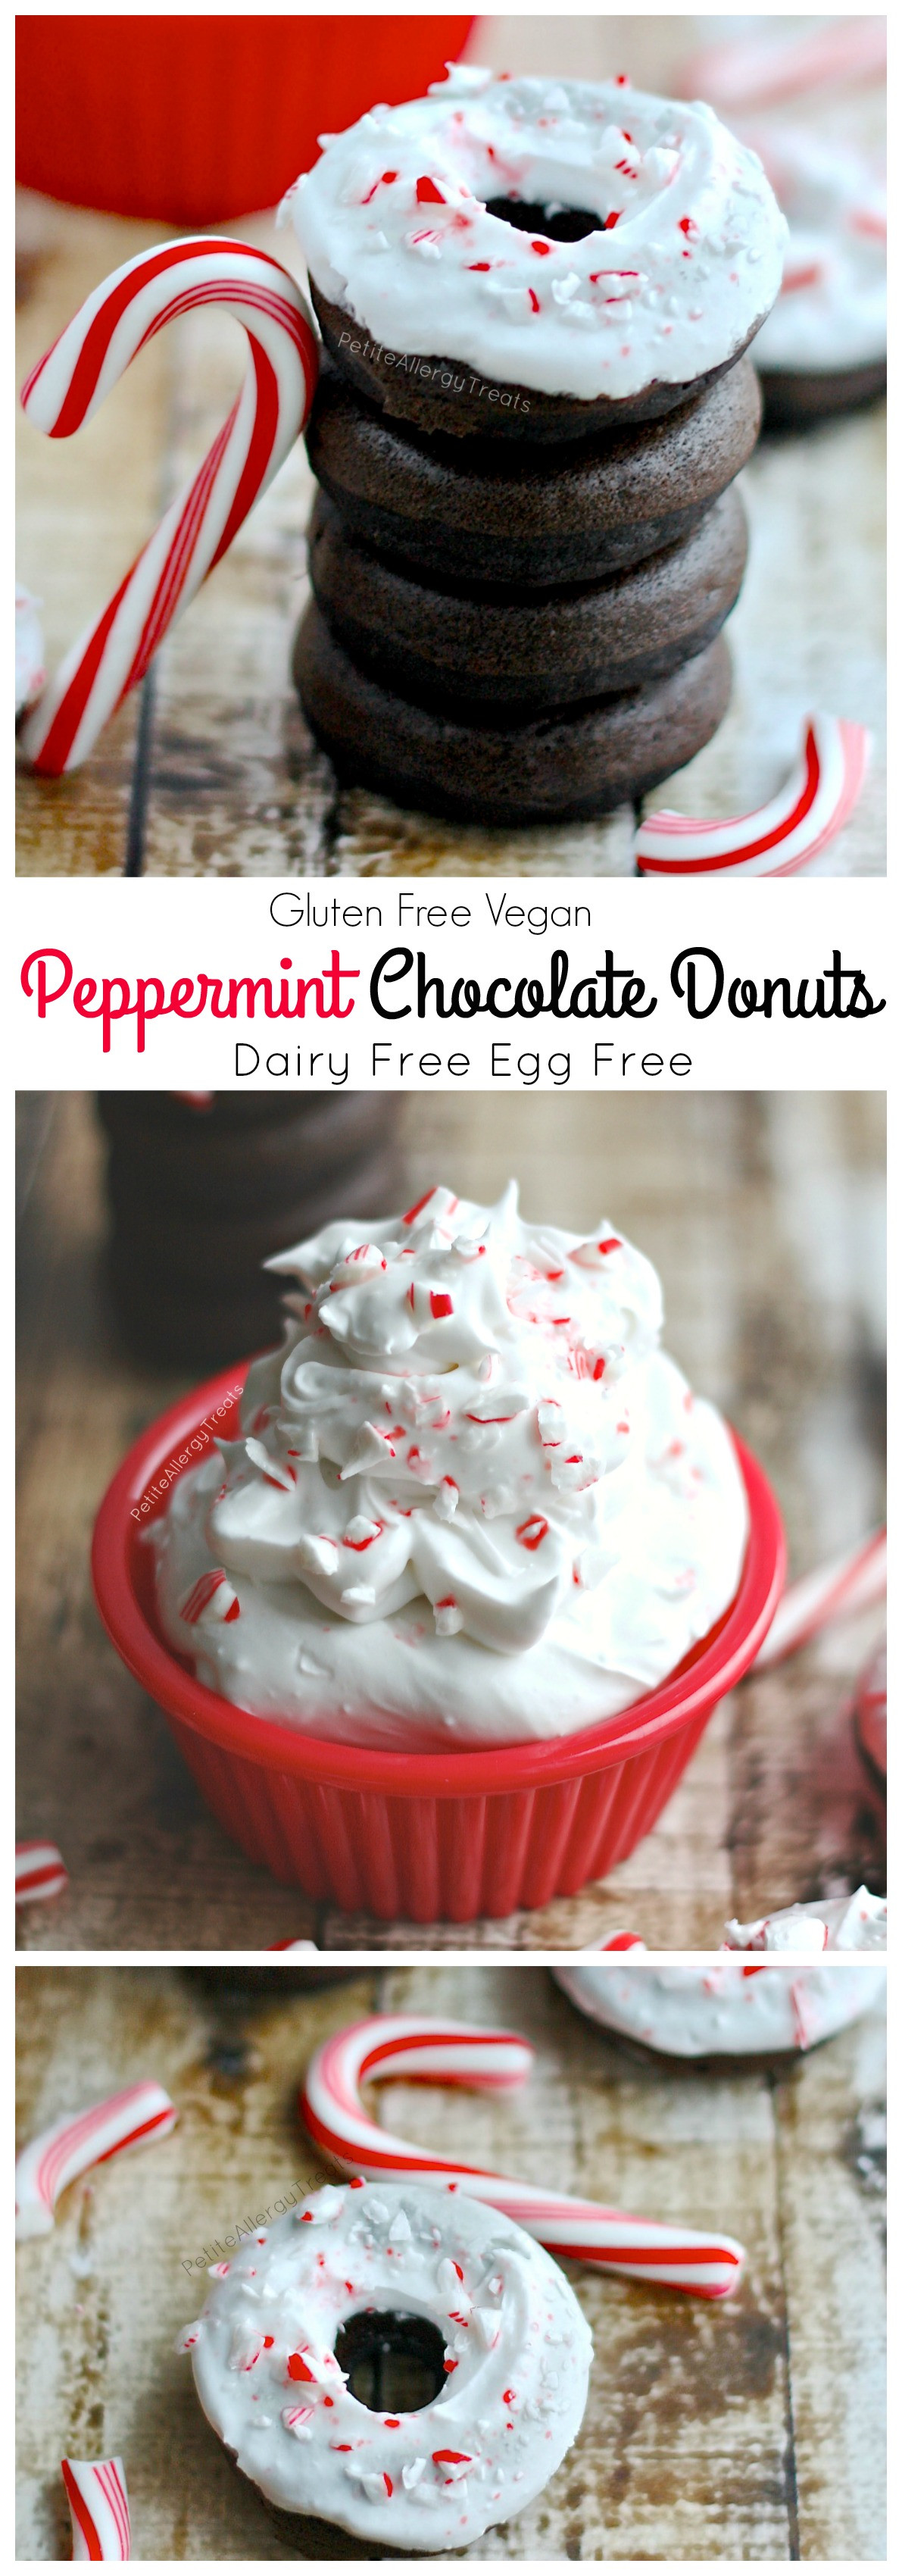 Gluten Free Christmas Candy
 Gluten Free Peppermint Chocolate Donuts vegan dairy free